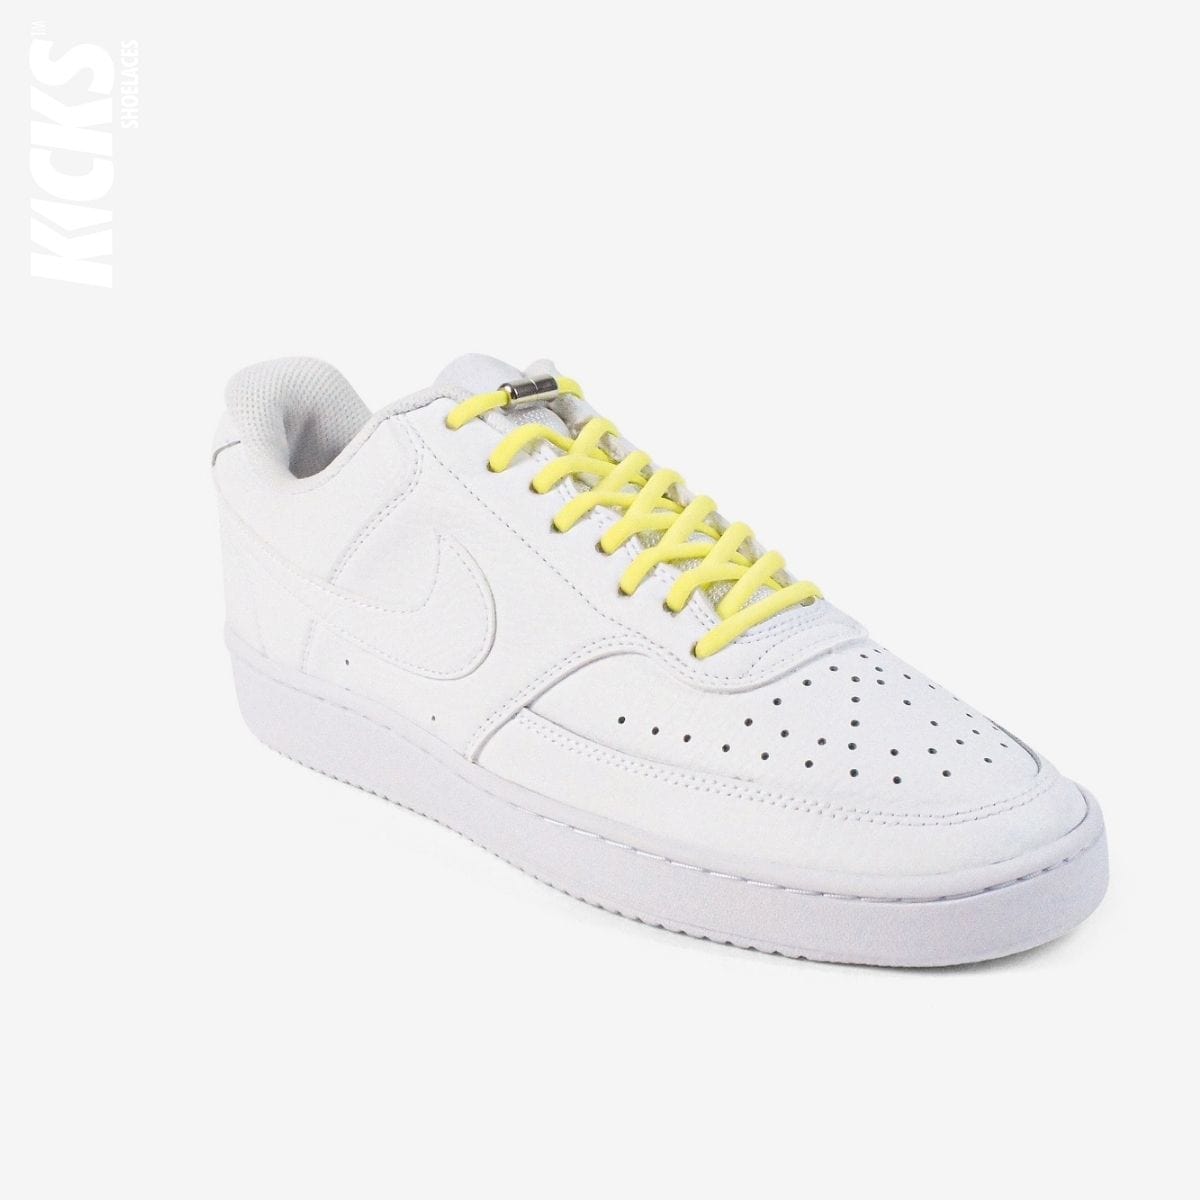 round-no-tie-shoelaces-with-fluorescent-yellow-laces-on-nike-white-sneakers-by-kicks-shoelaces